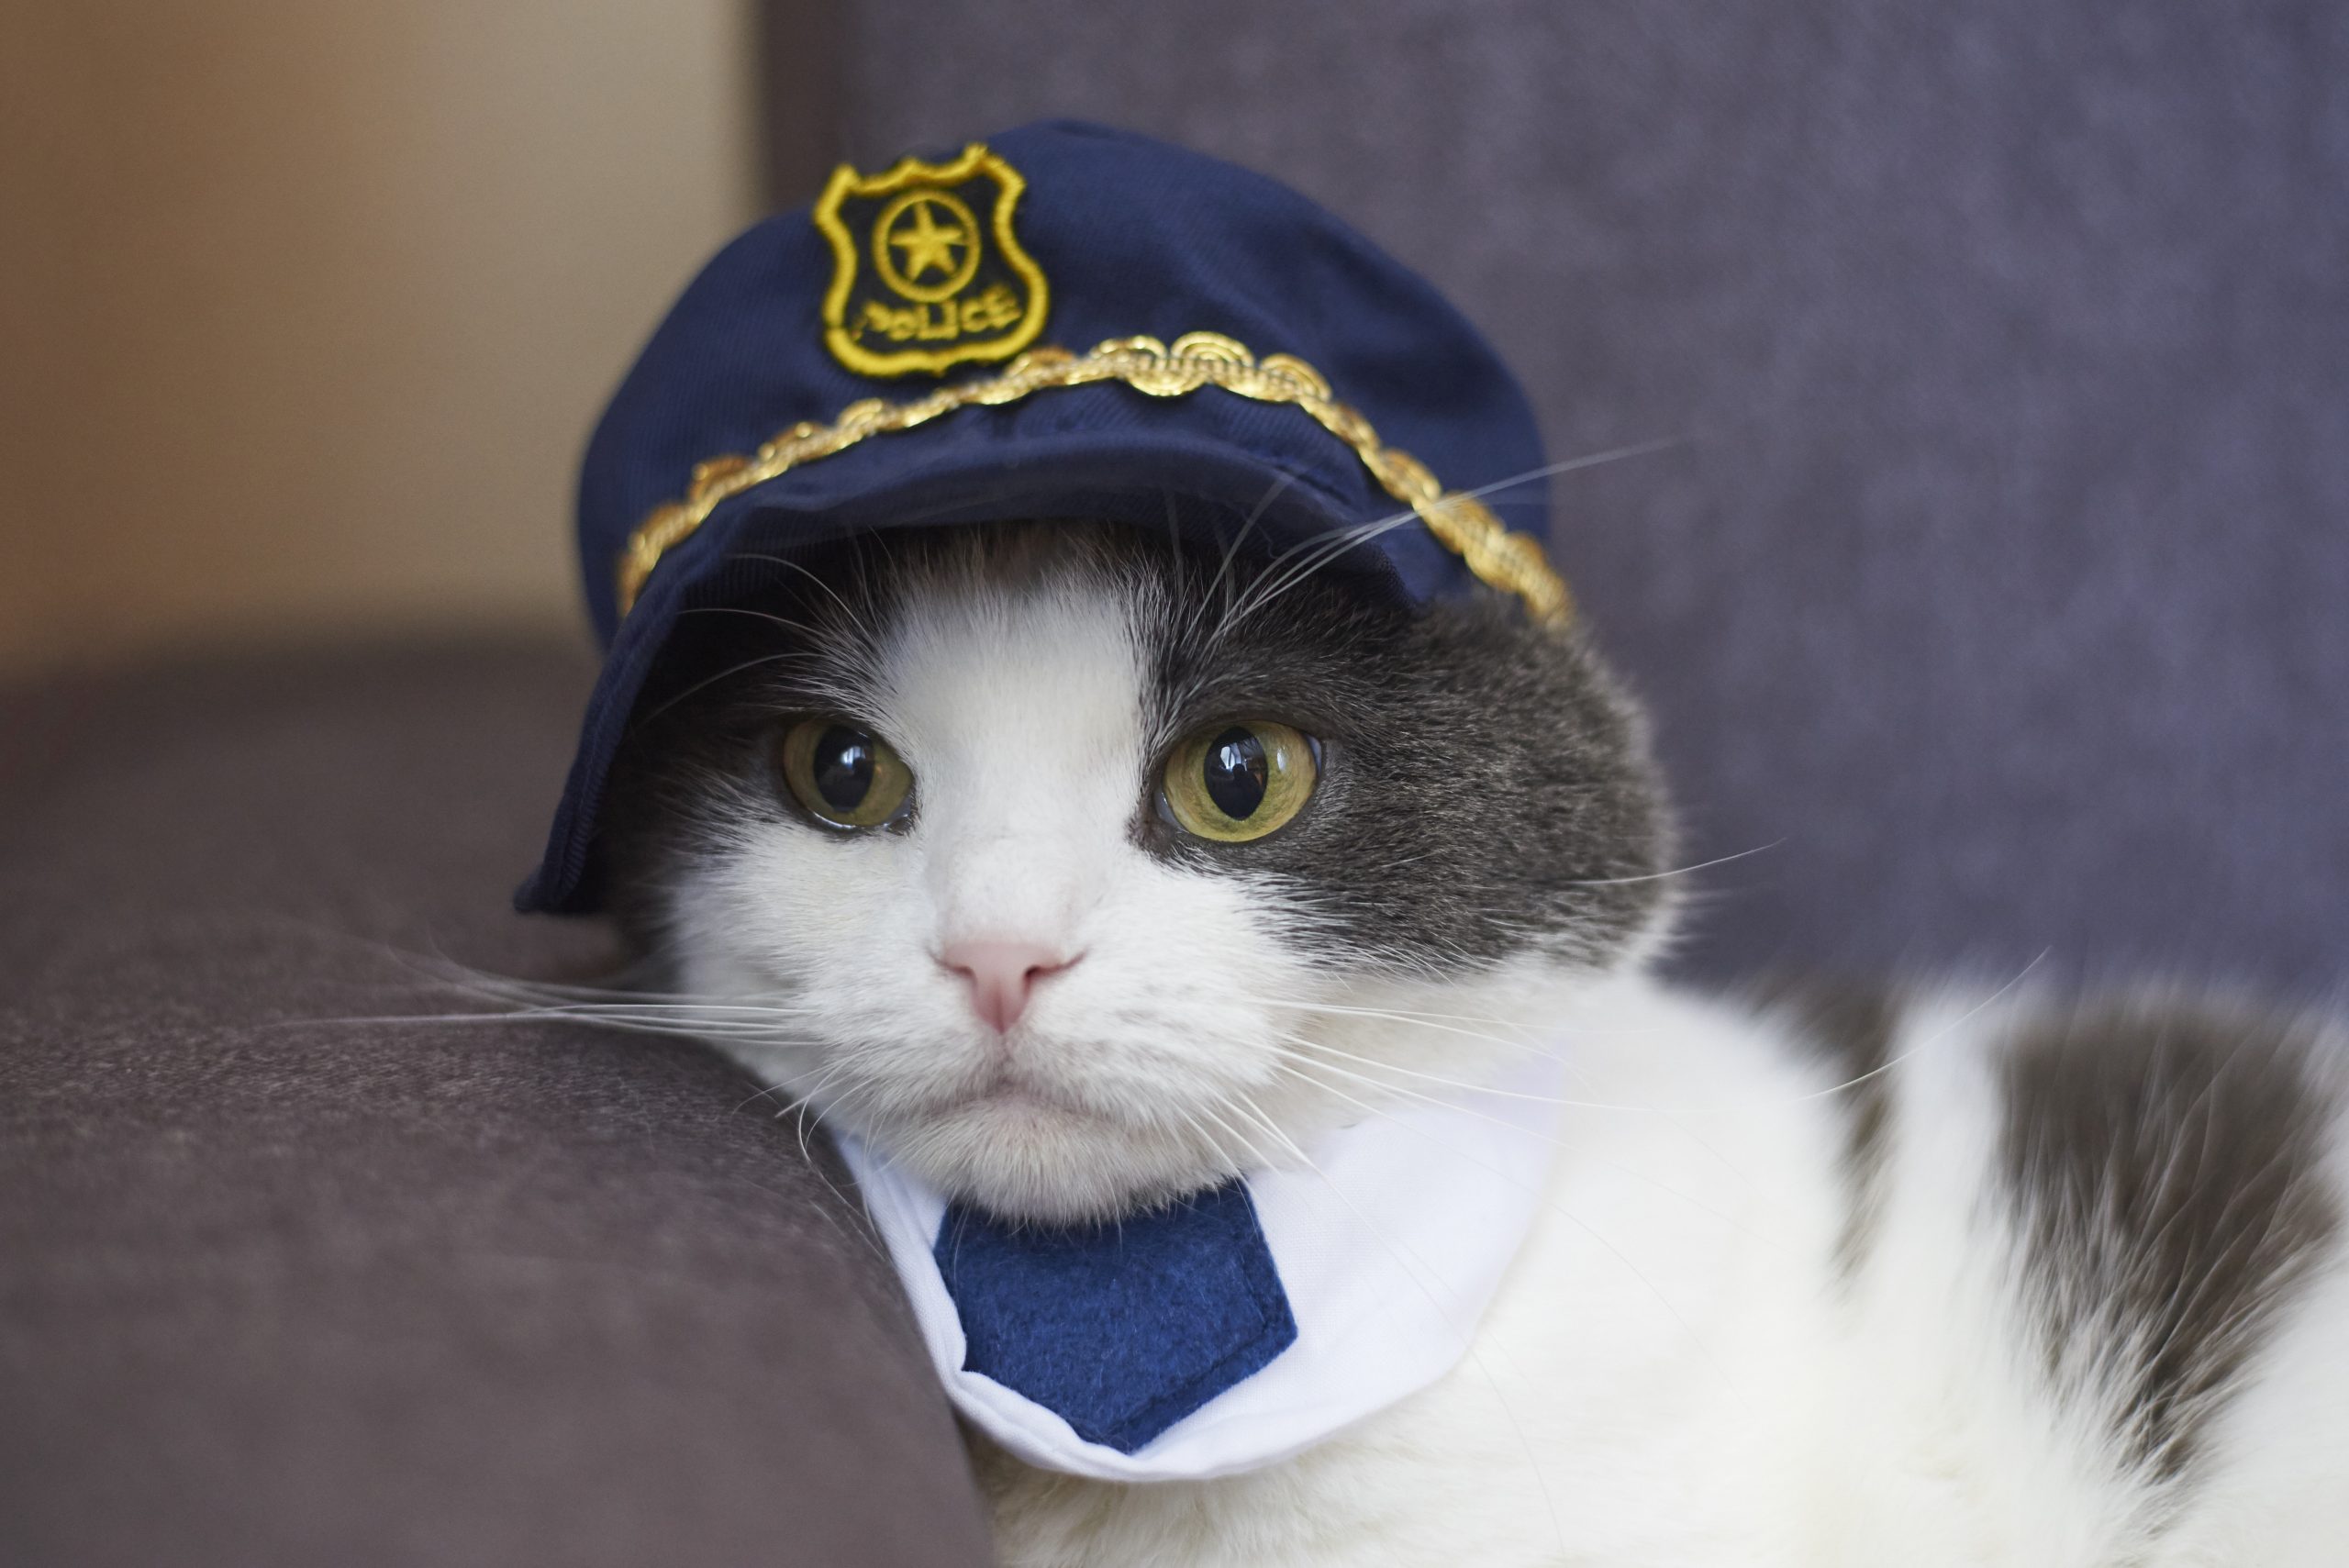 Portrait of a funny cat in a police hat and tie.